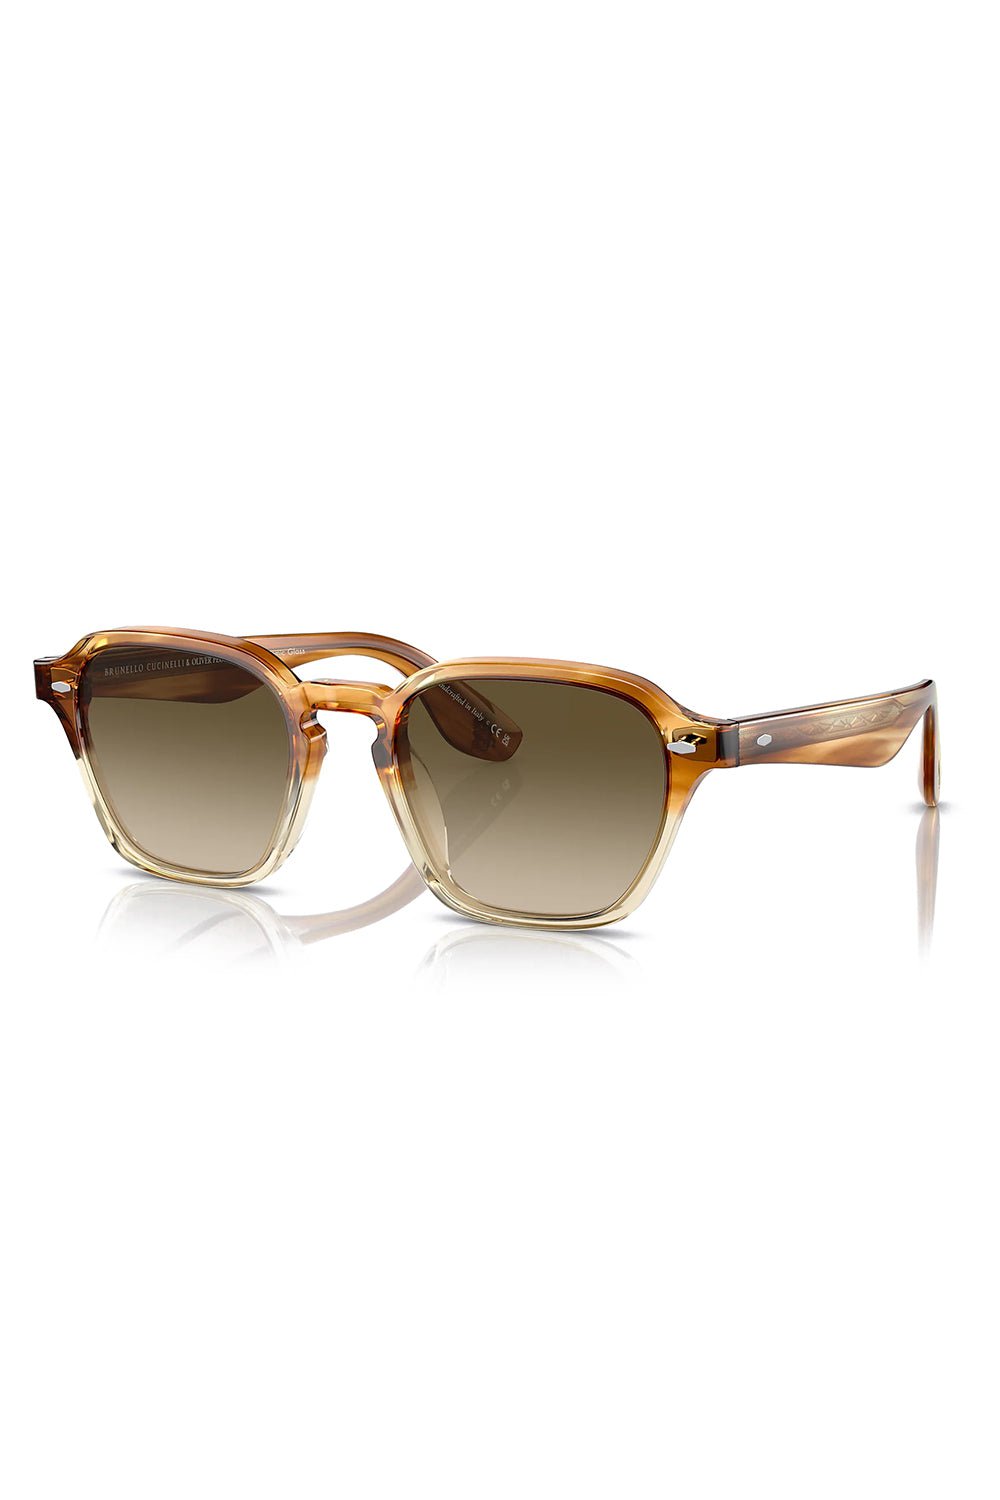 OLIVER PEOPLES-Griffo Sunglasses-HONEY/OLIVE